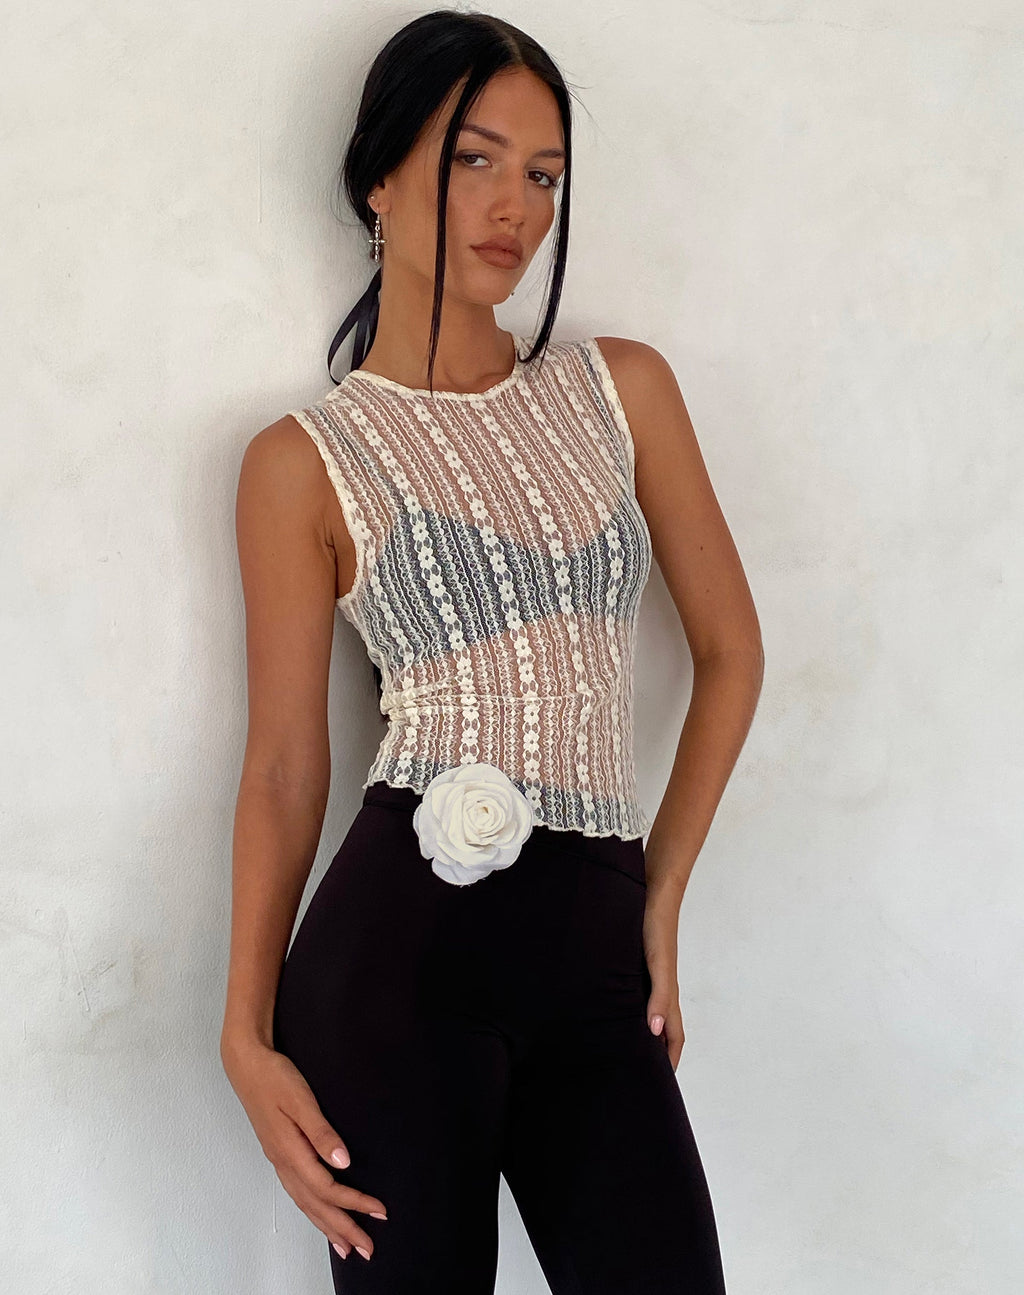 Monelo Unlined Vest Top in Ditsy Floral Cream Lace